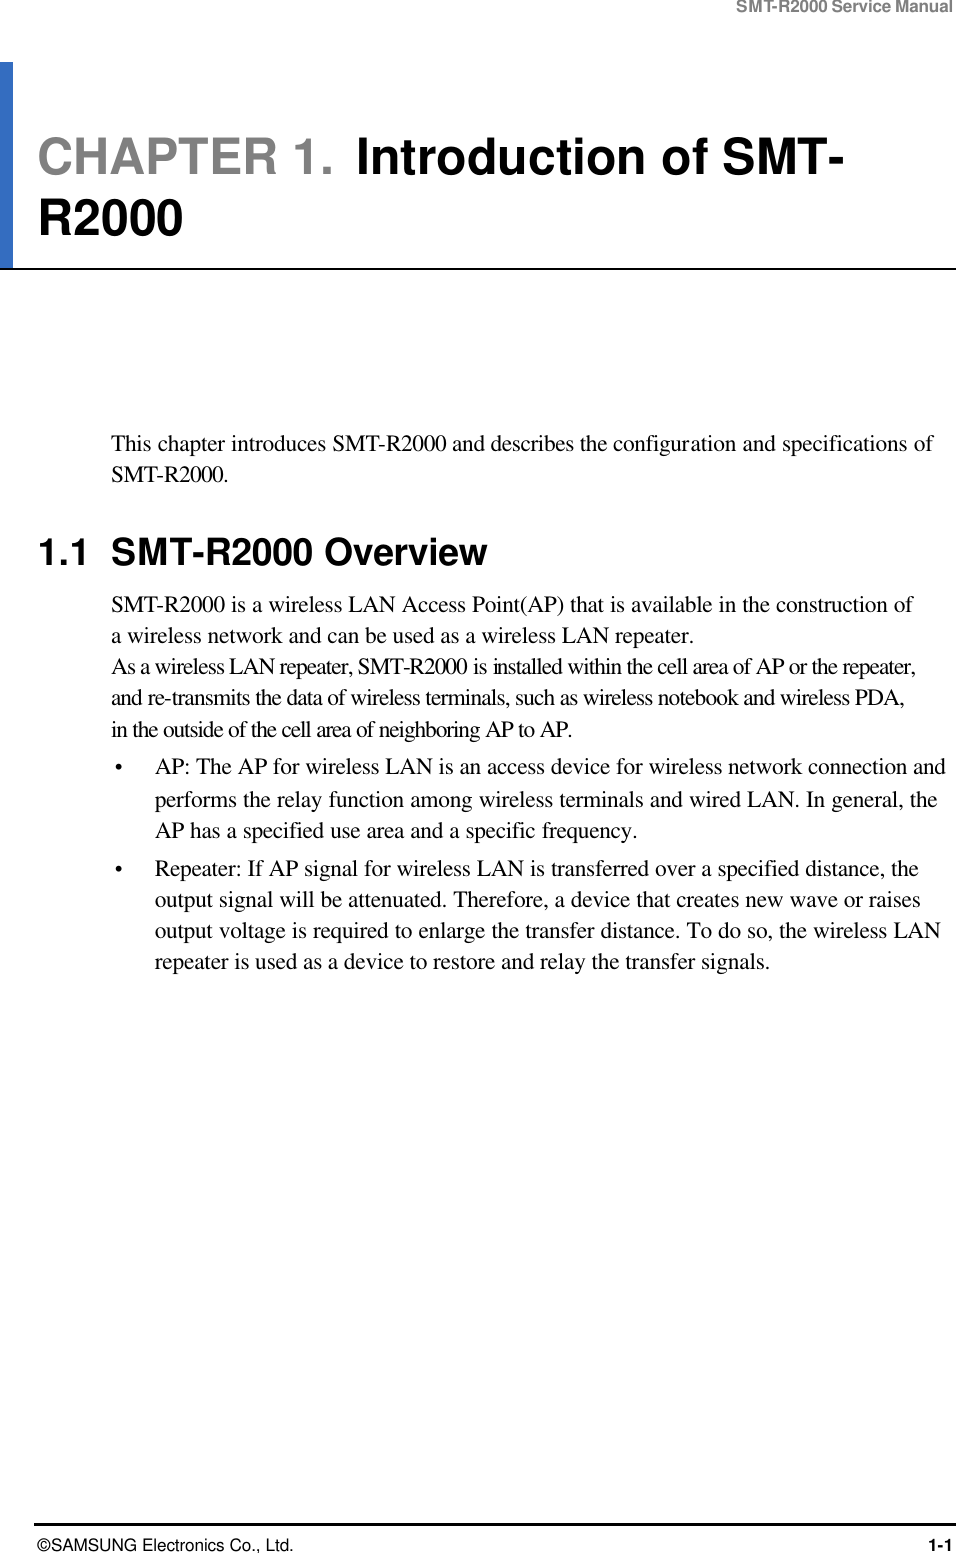 SMT-R2000 Service Manual © SAMSUNG Electronics Co., Ltd. 1-1 CHAPTER 1.  Introduction of SMT-R2000      This chapter introduces SMT-R2000 and describes the configuration and specifications of SMT-R2000.  1.1 SMT-R2000 Overview SMT-R2000 is a wireless LAN Access Point(AP) that is available in the construction of   a wireless network and can be used as a wireless LAN repeater.   As a wireless LAN repeater, SMT-R2000 is installed within the cell area of AP or the repeater, and re-transmits the data of wireless terminals, such as wireless notebook and wireless PDA,   in the outside of the cell area of neighboring AP to AP.  Ÿ AP: The AP for wireless LAN is an access device for wireless network connection and performs the relay function among wireless terminals and wired LAN. In general, the AP has a specified use area and a specific frequency.   Ÿ Repeater: If AP signal for wireless LAN is transferred over a specified distance, the output signal will be attenuated. Therefore, a device that creates new wave or raises output voltage is required to enlarge the transfer distance. To do so, the wireless LAN repeater is used as a device to restore and relay the transfer signals.  